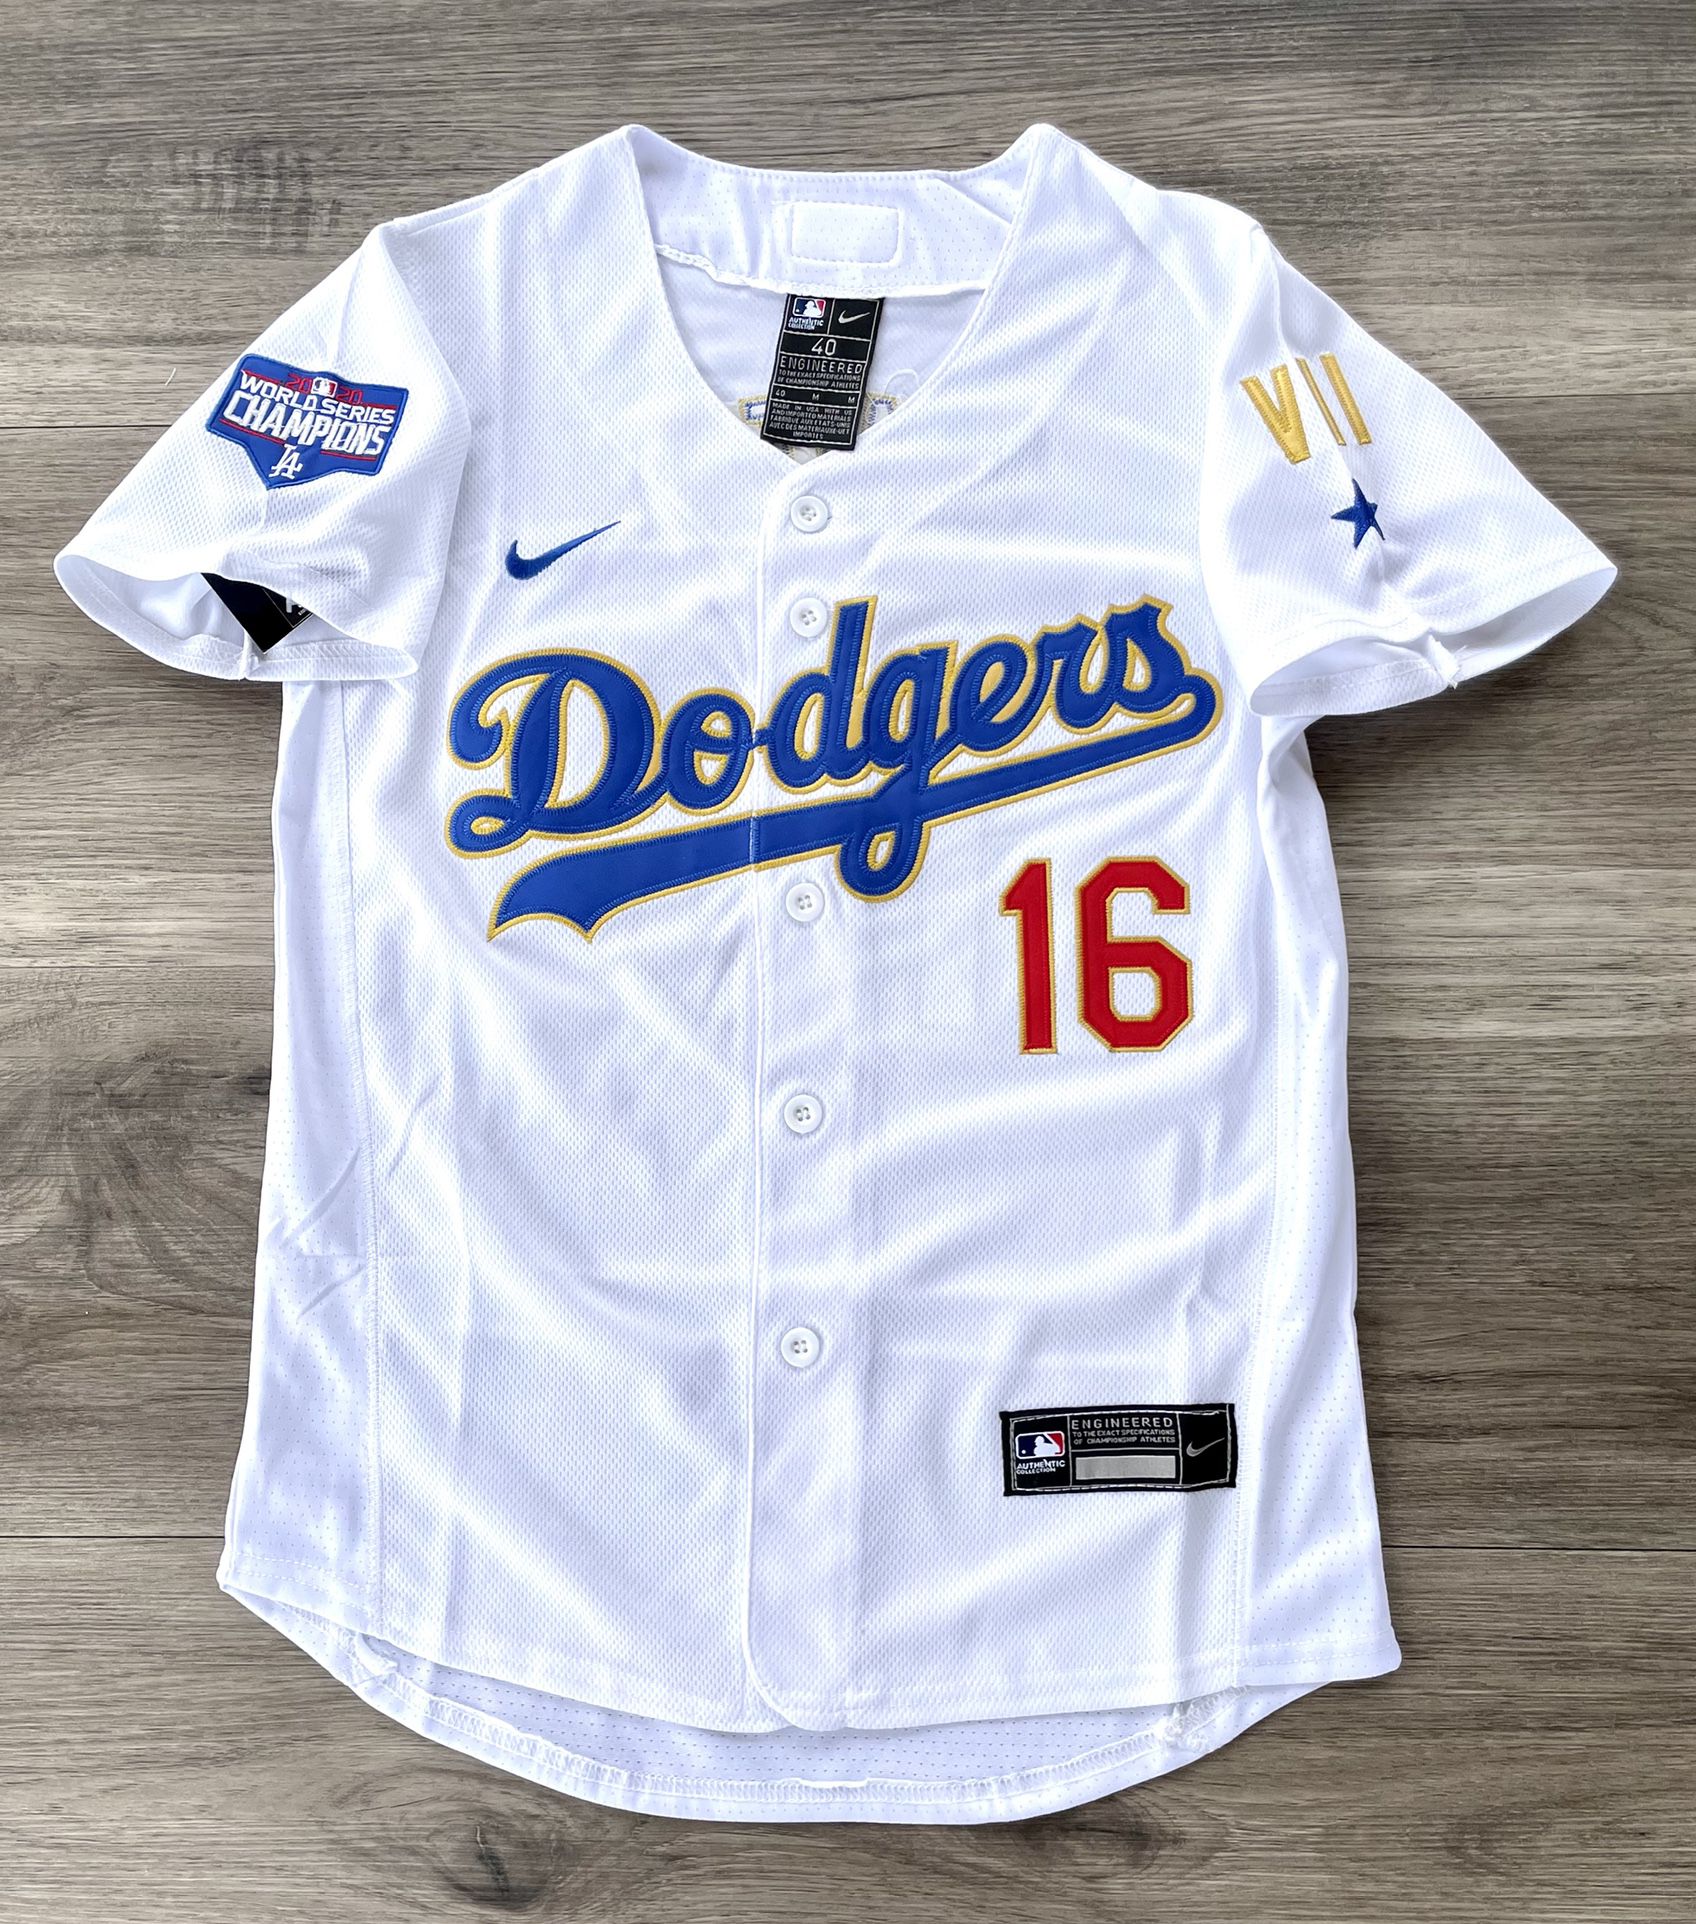 dodgers smith jersey